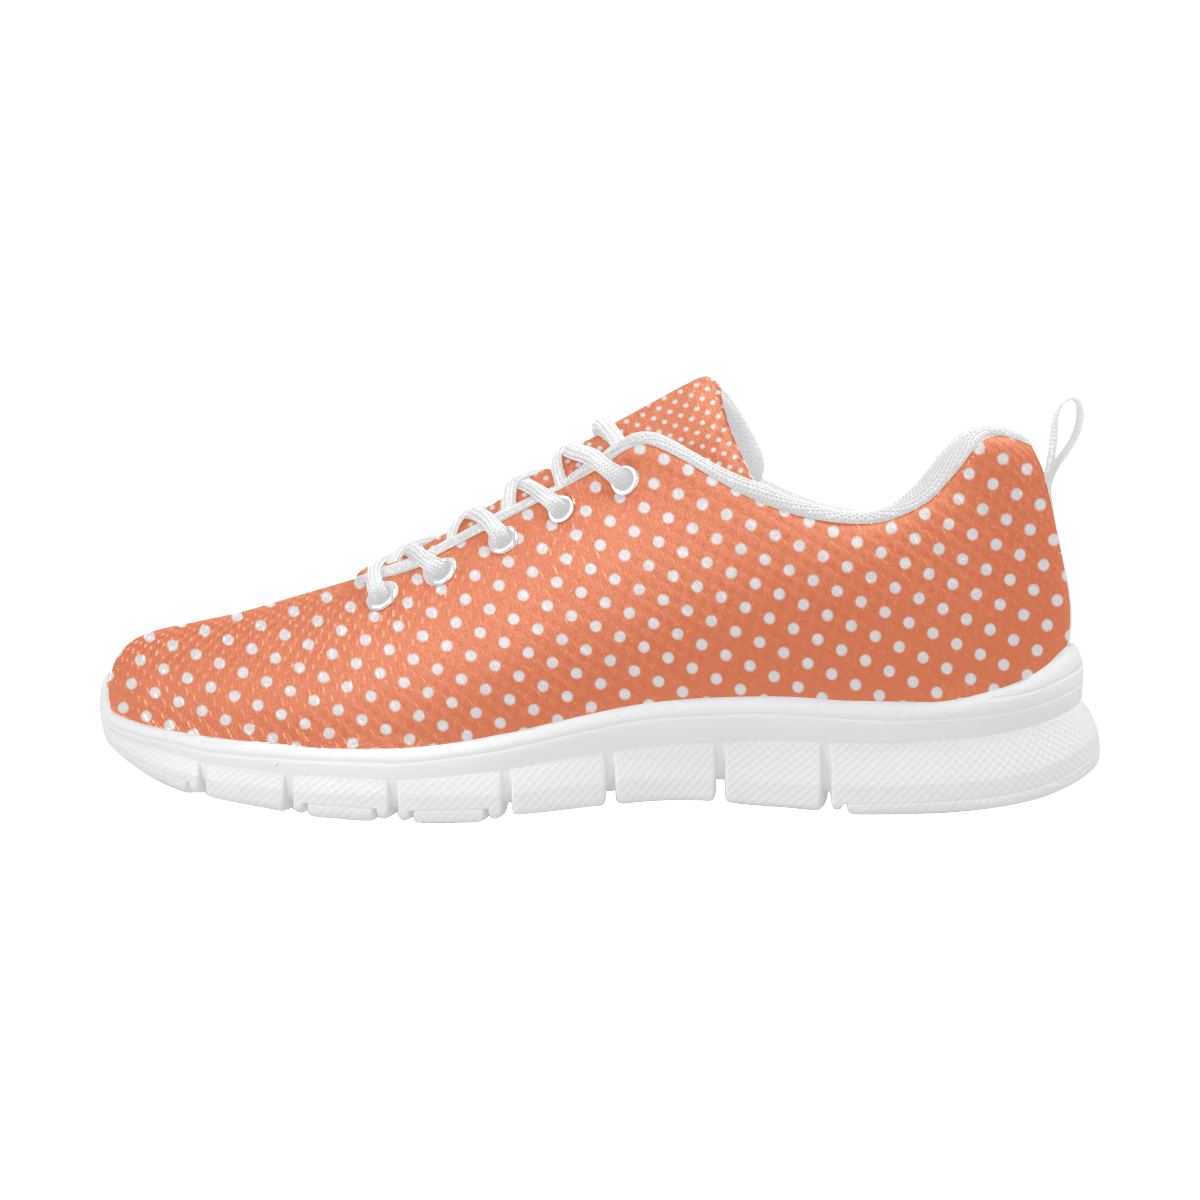 Appricot polka dots Women's Breathable Running Shoes (Model 055)